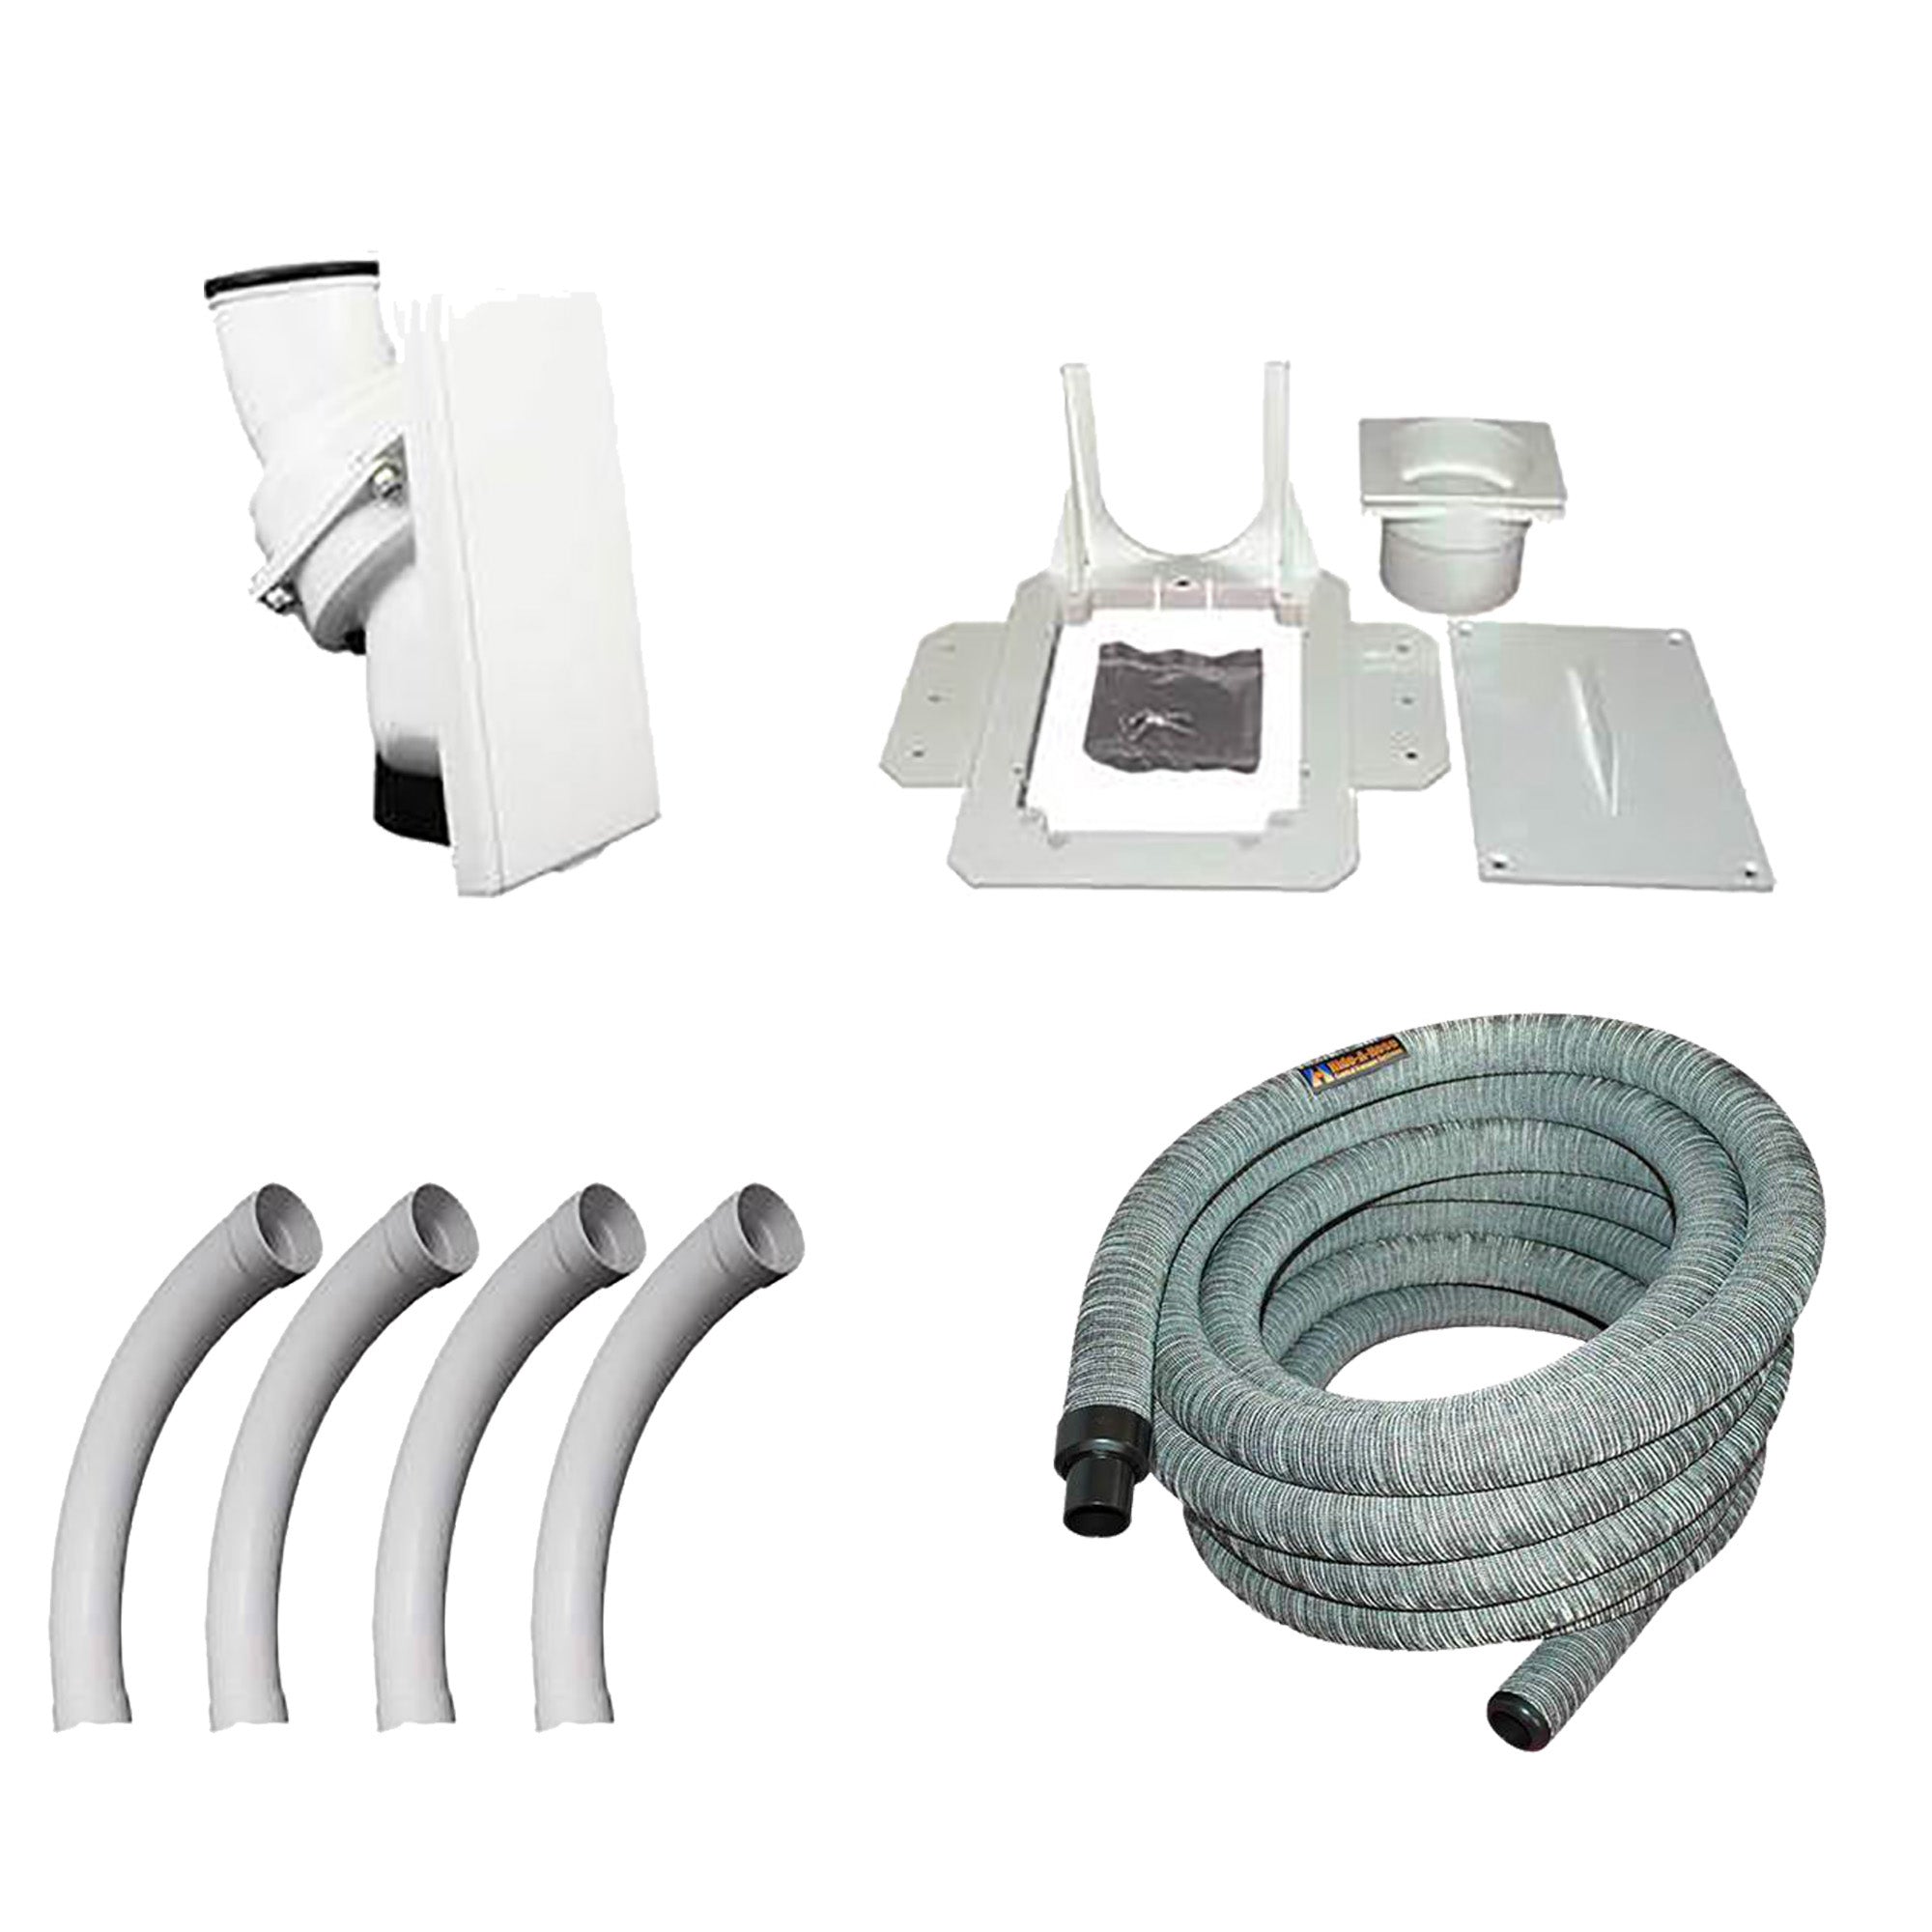 Hide-A-Hose Central Vacuum Retractable Hose Installation Kit with Hose Cover